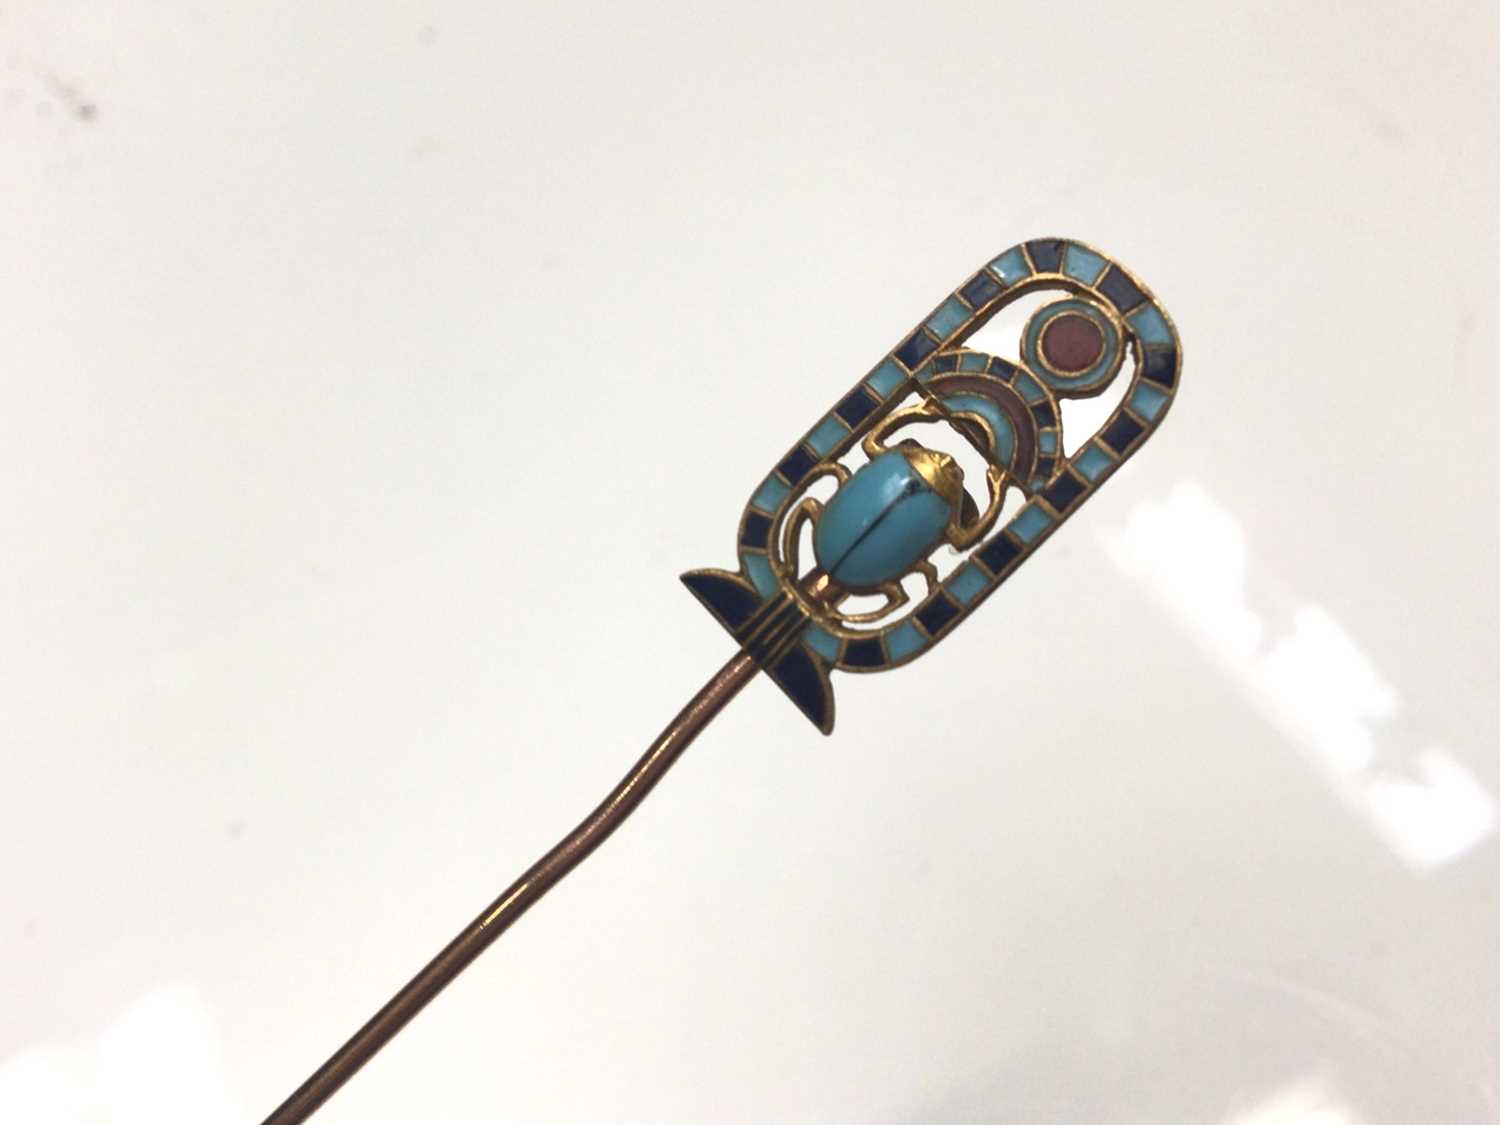 Lot 30 - Egyptian Revival gold (stamped 585) hat pin with enamel scarab beetle decoration